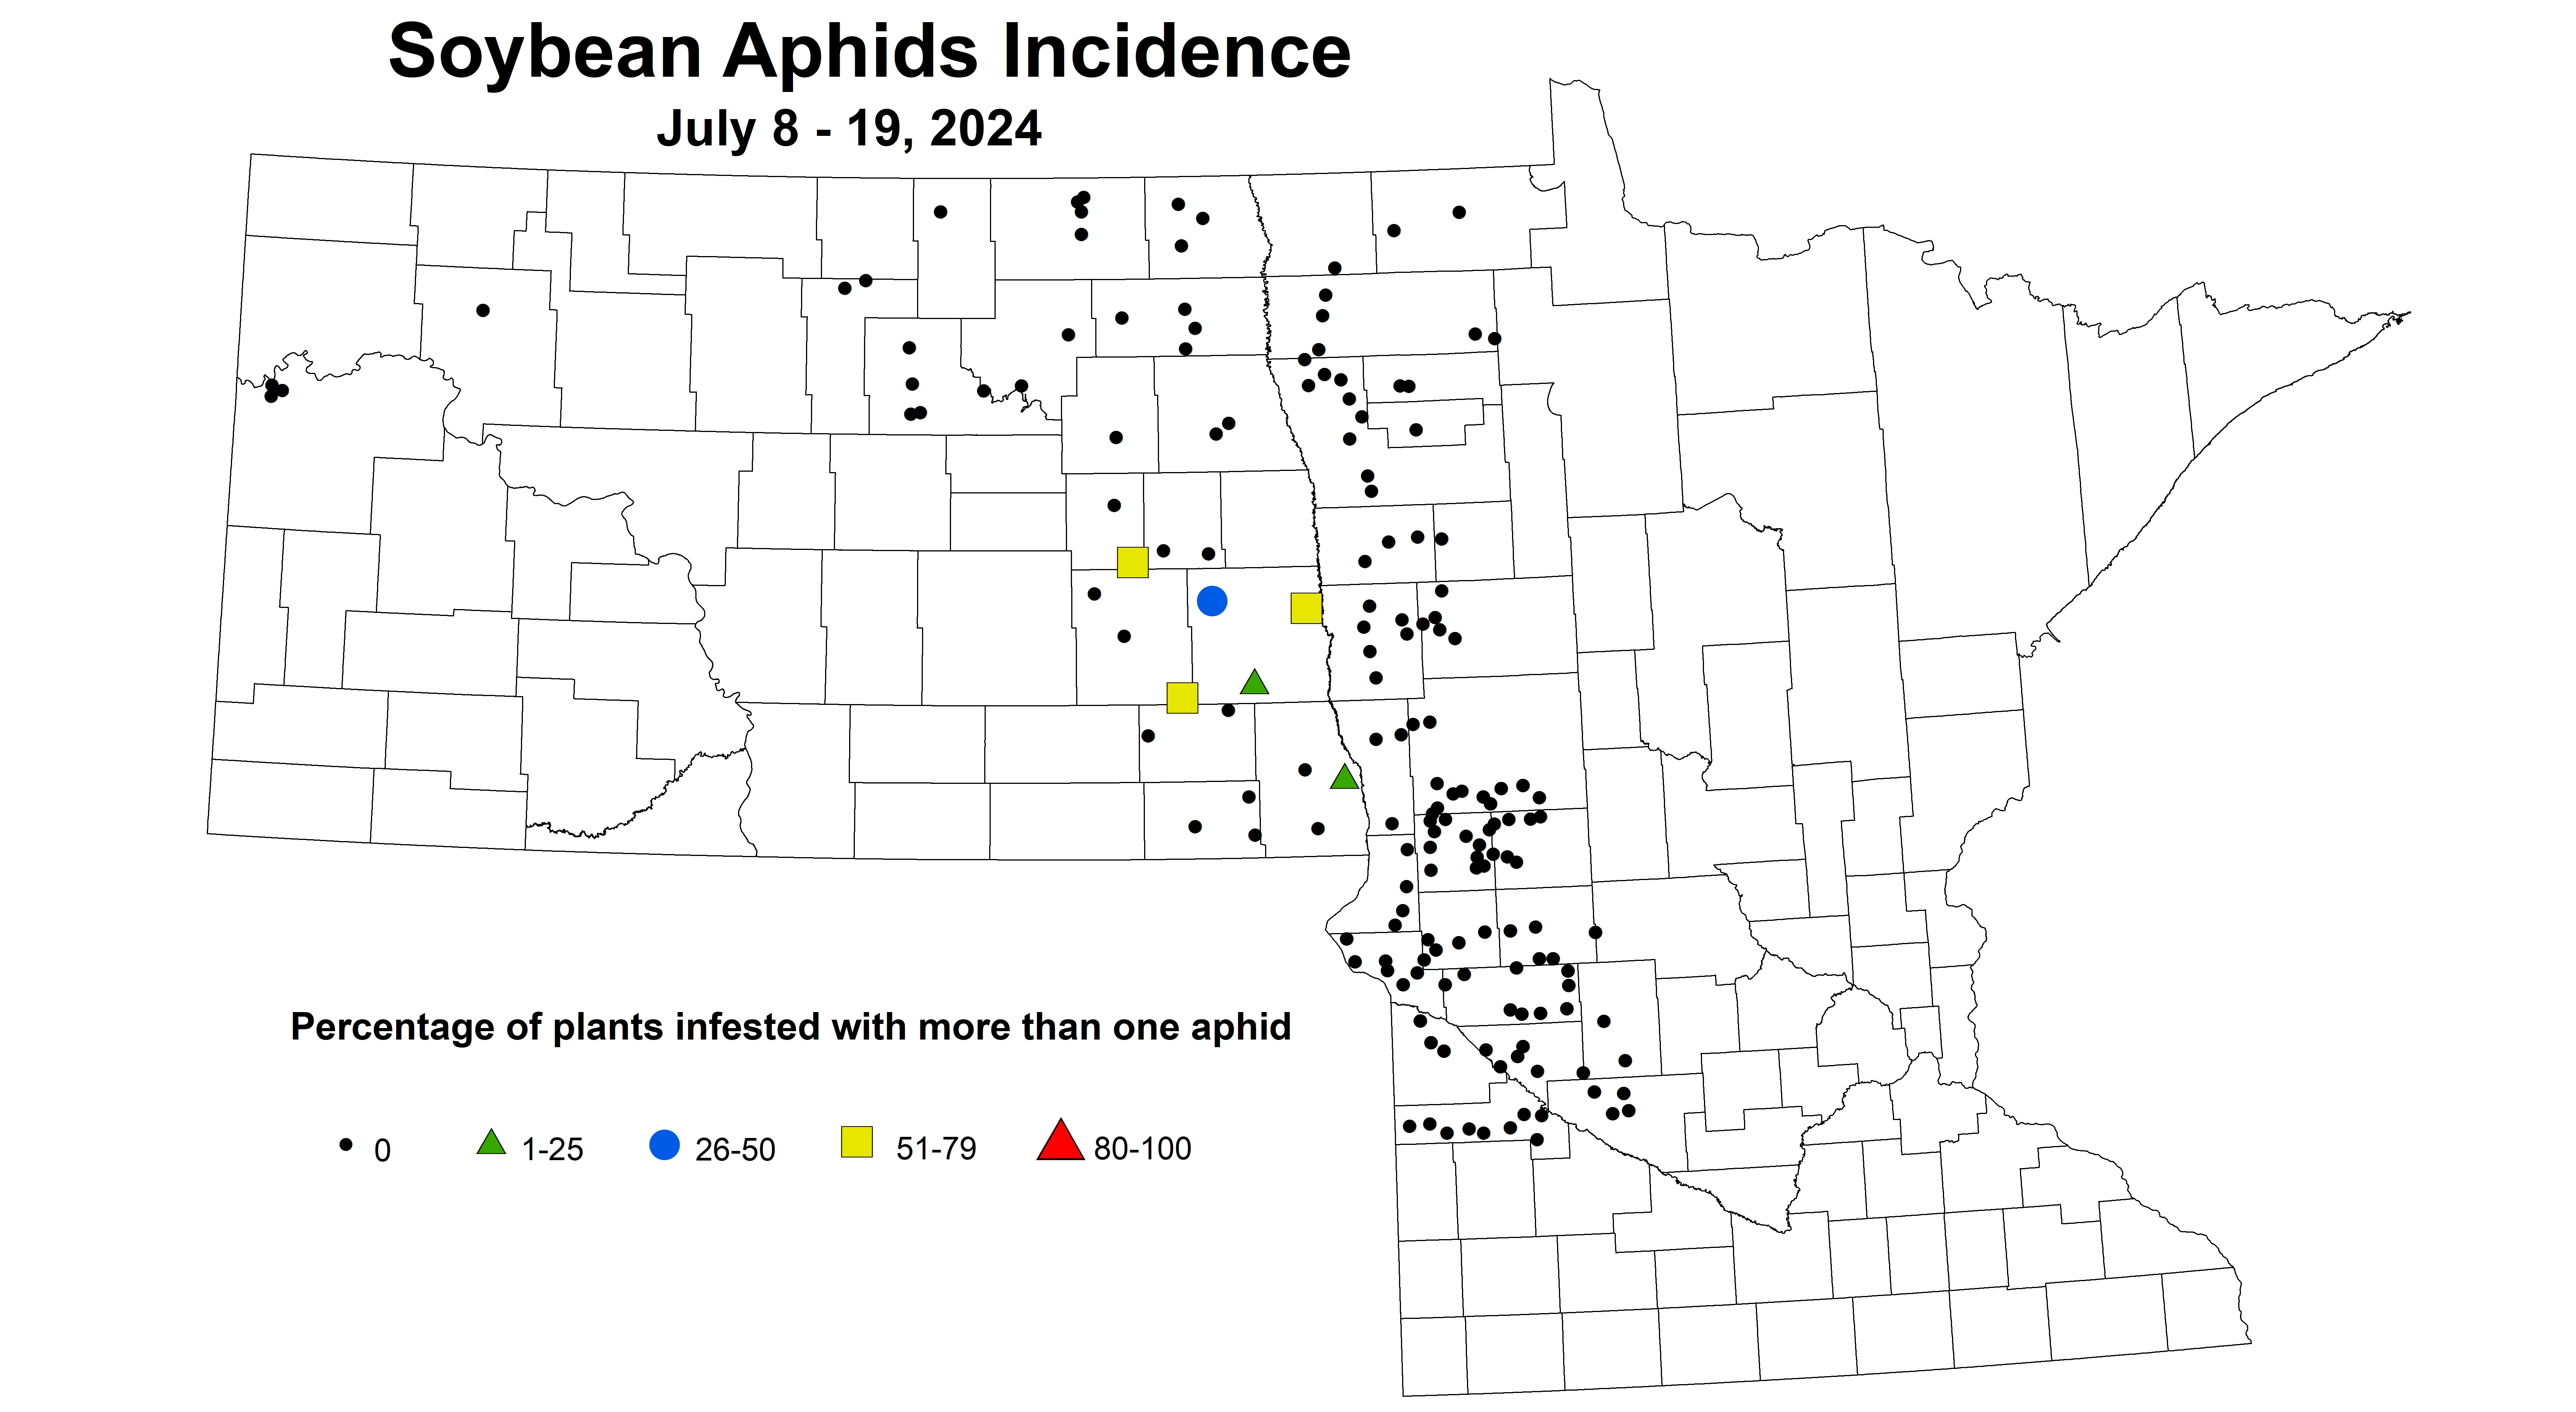 soybean aphid incidence July 8-19 2024